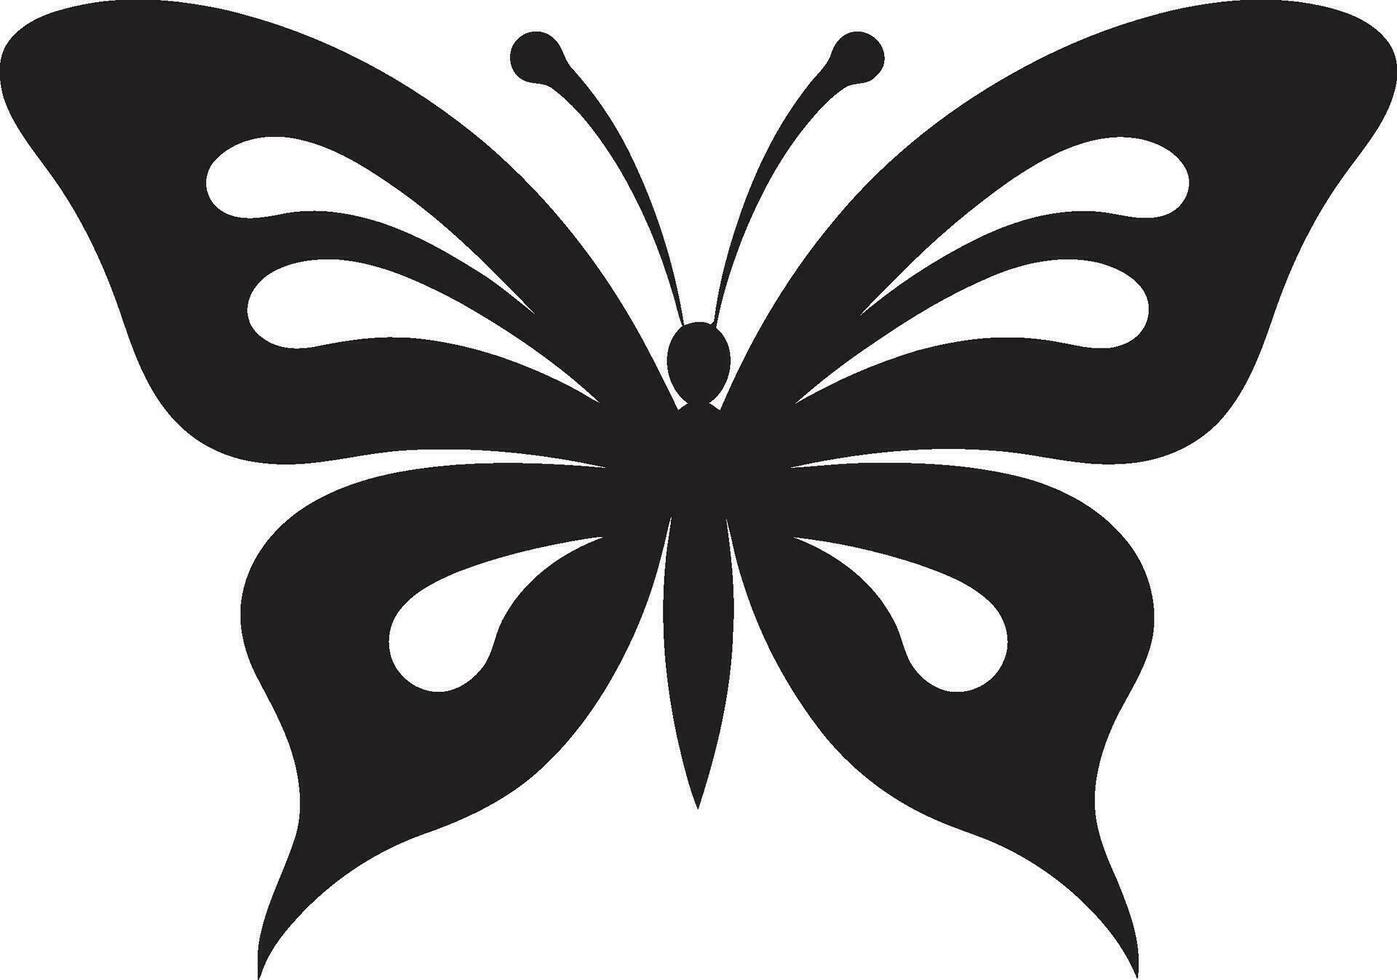 Wings of Simplicity Black Butterfly Mark Crafted Grace Noir Butterfly Emblem vector